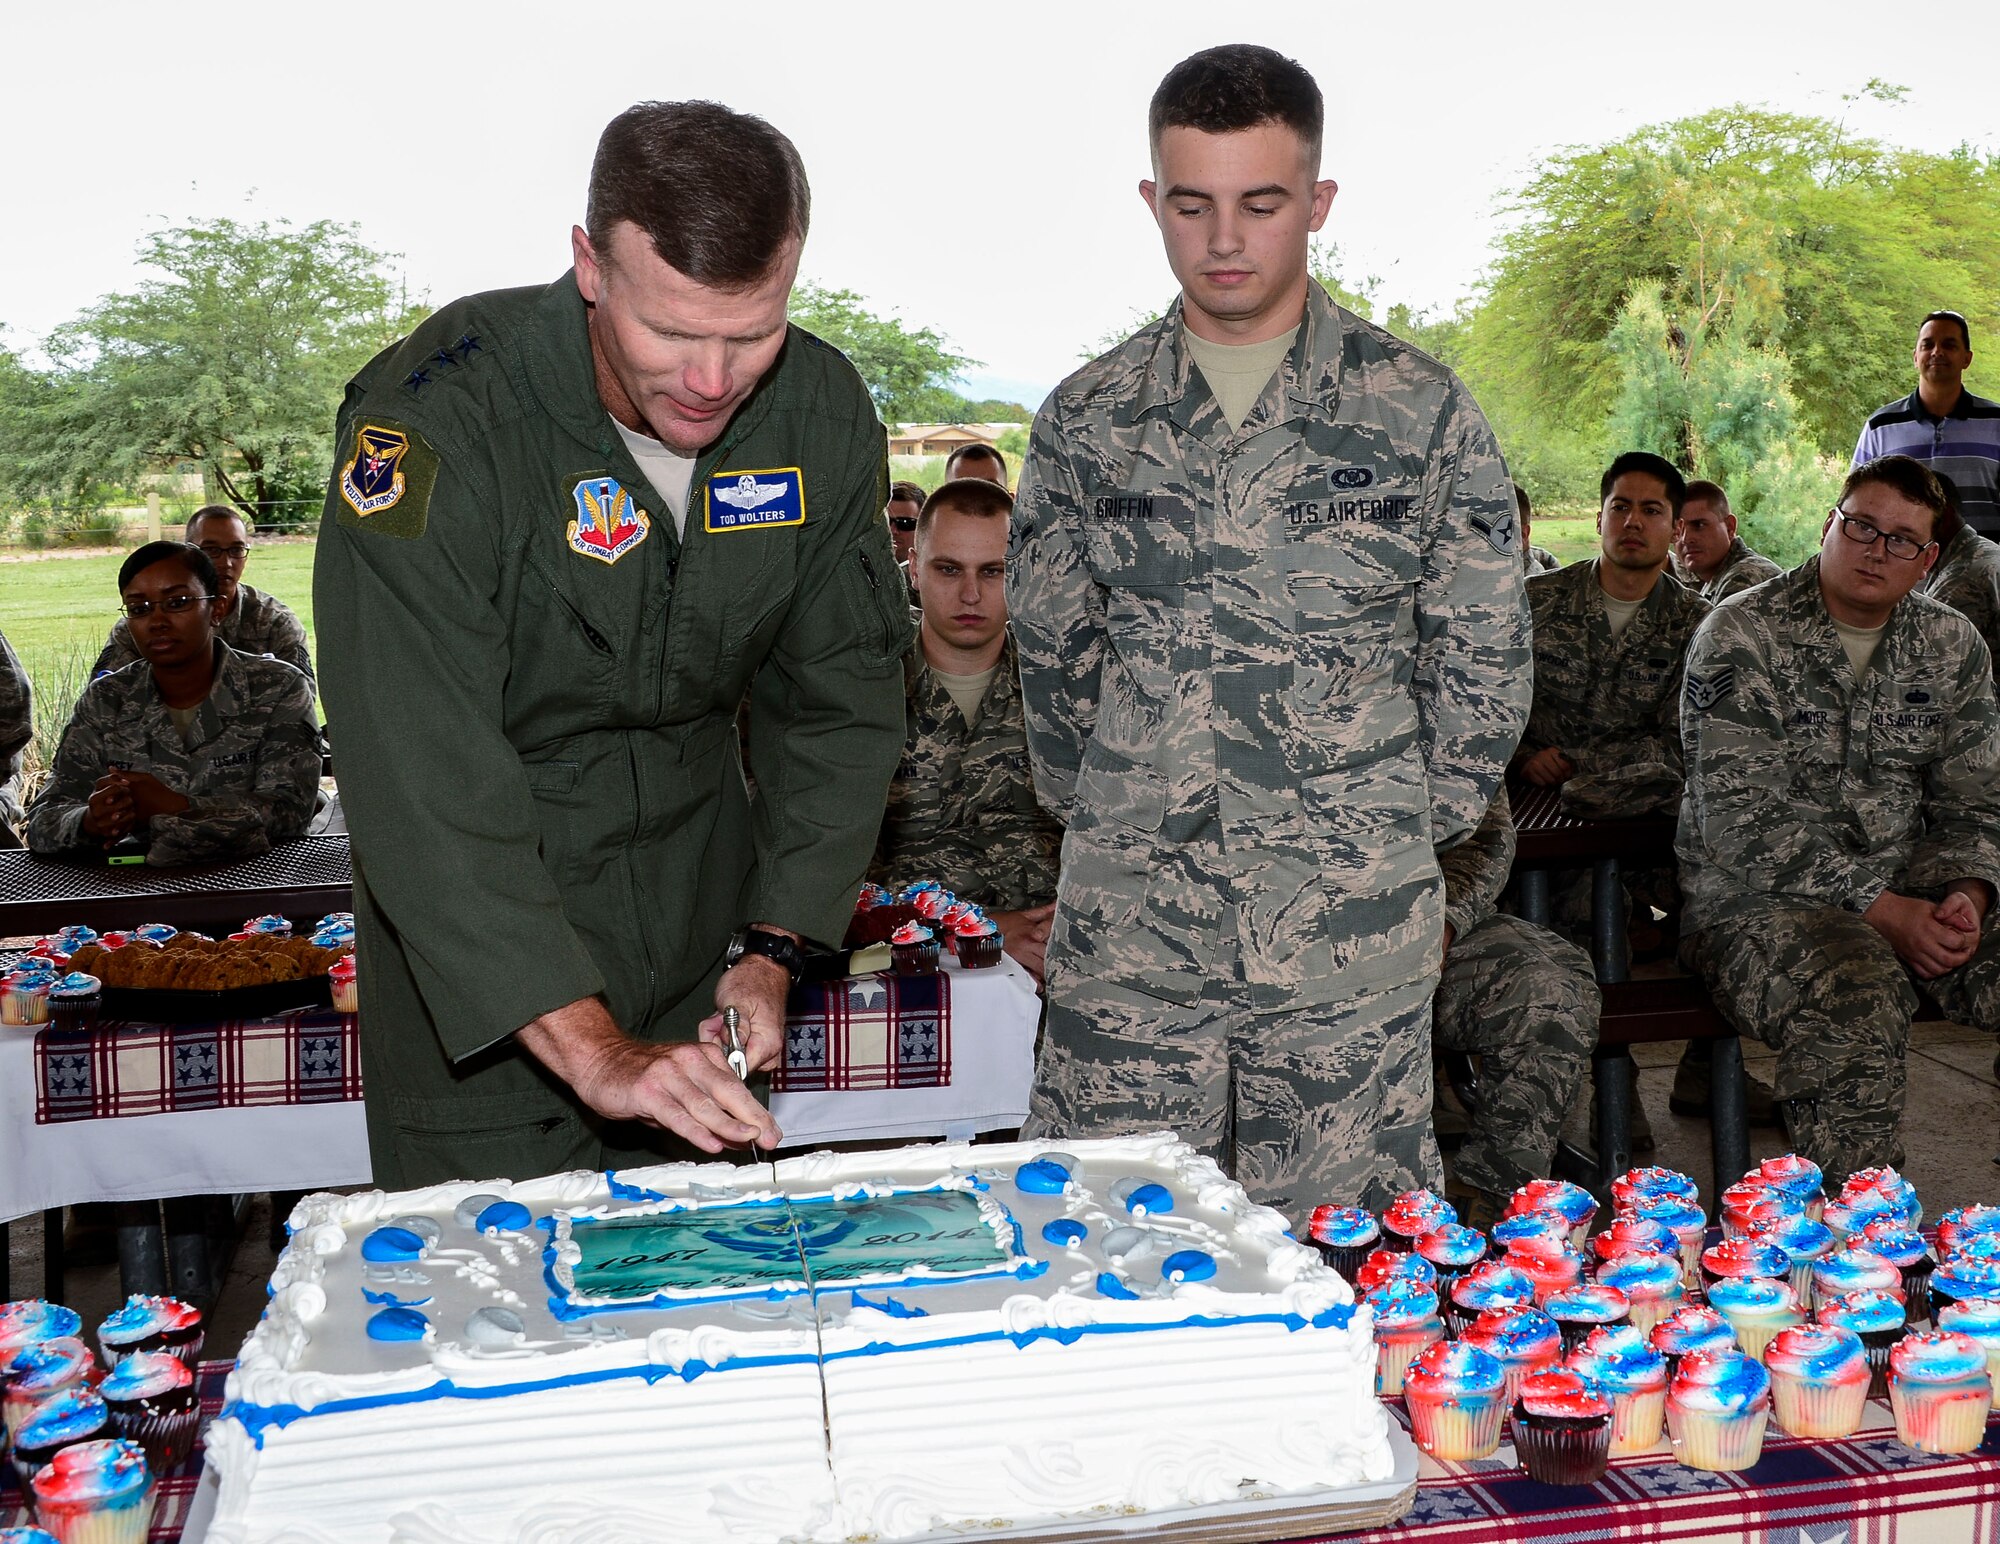 Lt. Gen. Tod Wolters, 12th Air Force (Air Forces Southern) commander, and Amn William Griffin, assigned to the 612th Air and Space Center, cut slices of cake during the 67th Air Force Birthday Celebration at Davis-Monthan AFB, Ariz., Sept. 18, 2014.  Founded on Sept. 18, 1947, President Harry S. Truman signed the National Security Act that not only established a new defense organization but also established the U.S. Air Force as an independent service.  Over the past 67 years the U.S. Air Force has made its mark in history and around the world as it focuses its efforts on maintaining air, space, and cyberspace superiority.  (U.S. Air Force photo by Tech. Sgt. Heather R. Redman/Released)